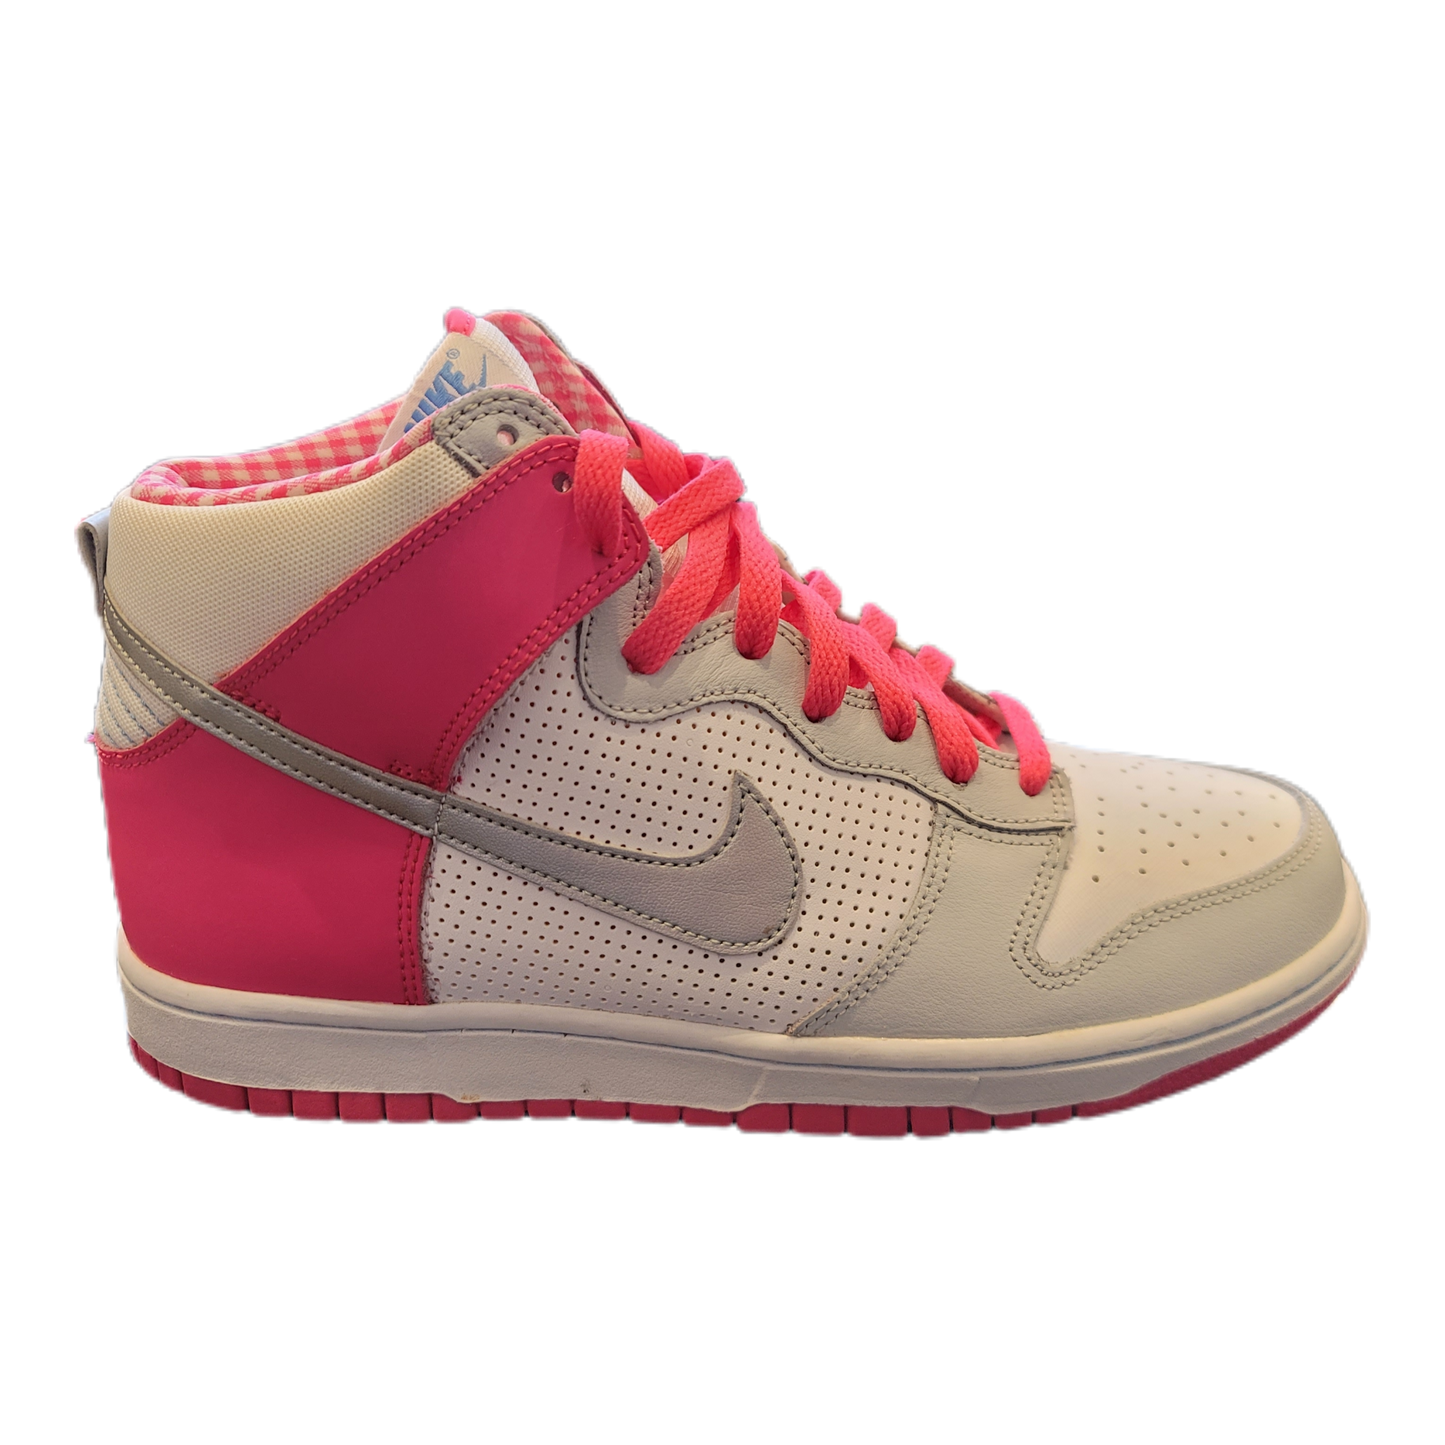 Nike Dunk High Pink Size 7Y